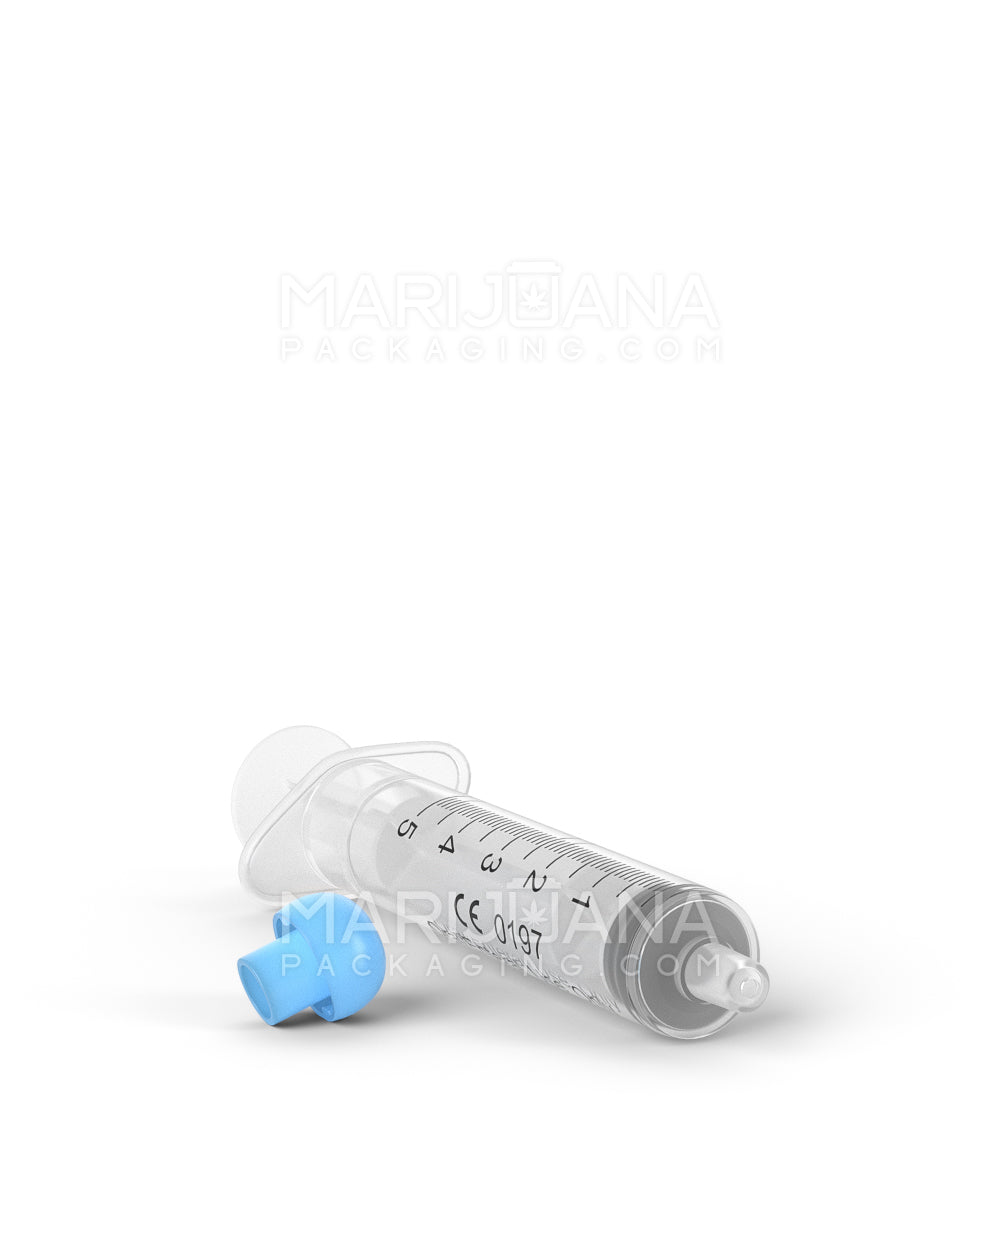 Plastic Oral Concentrate Syringes | 5mL - 1mL Increments | Sample - 4